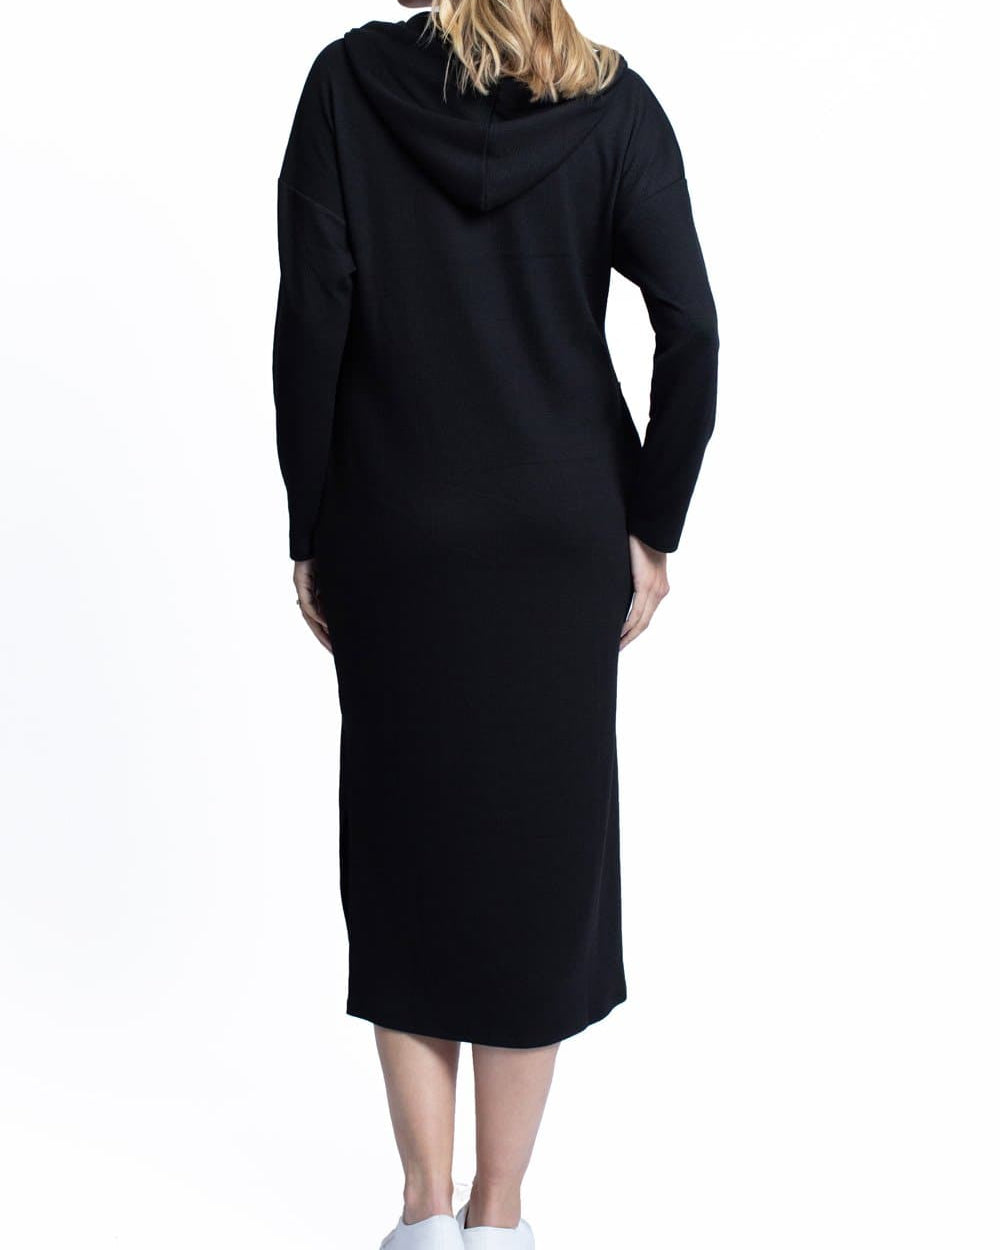 Back View - Maternity Oversize Hoodie Button Nursing Dress - Black - Angel Maternity - Maternity clothes